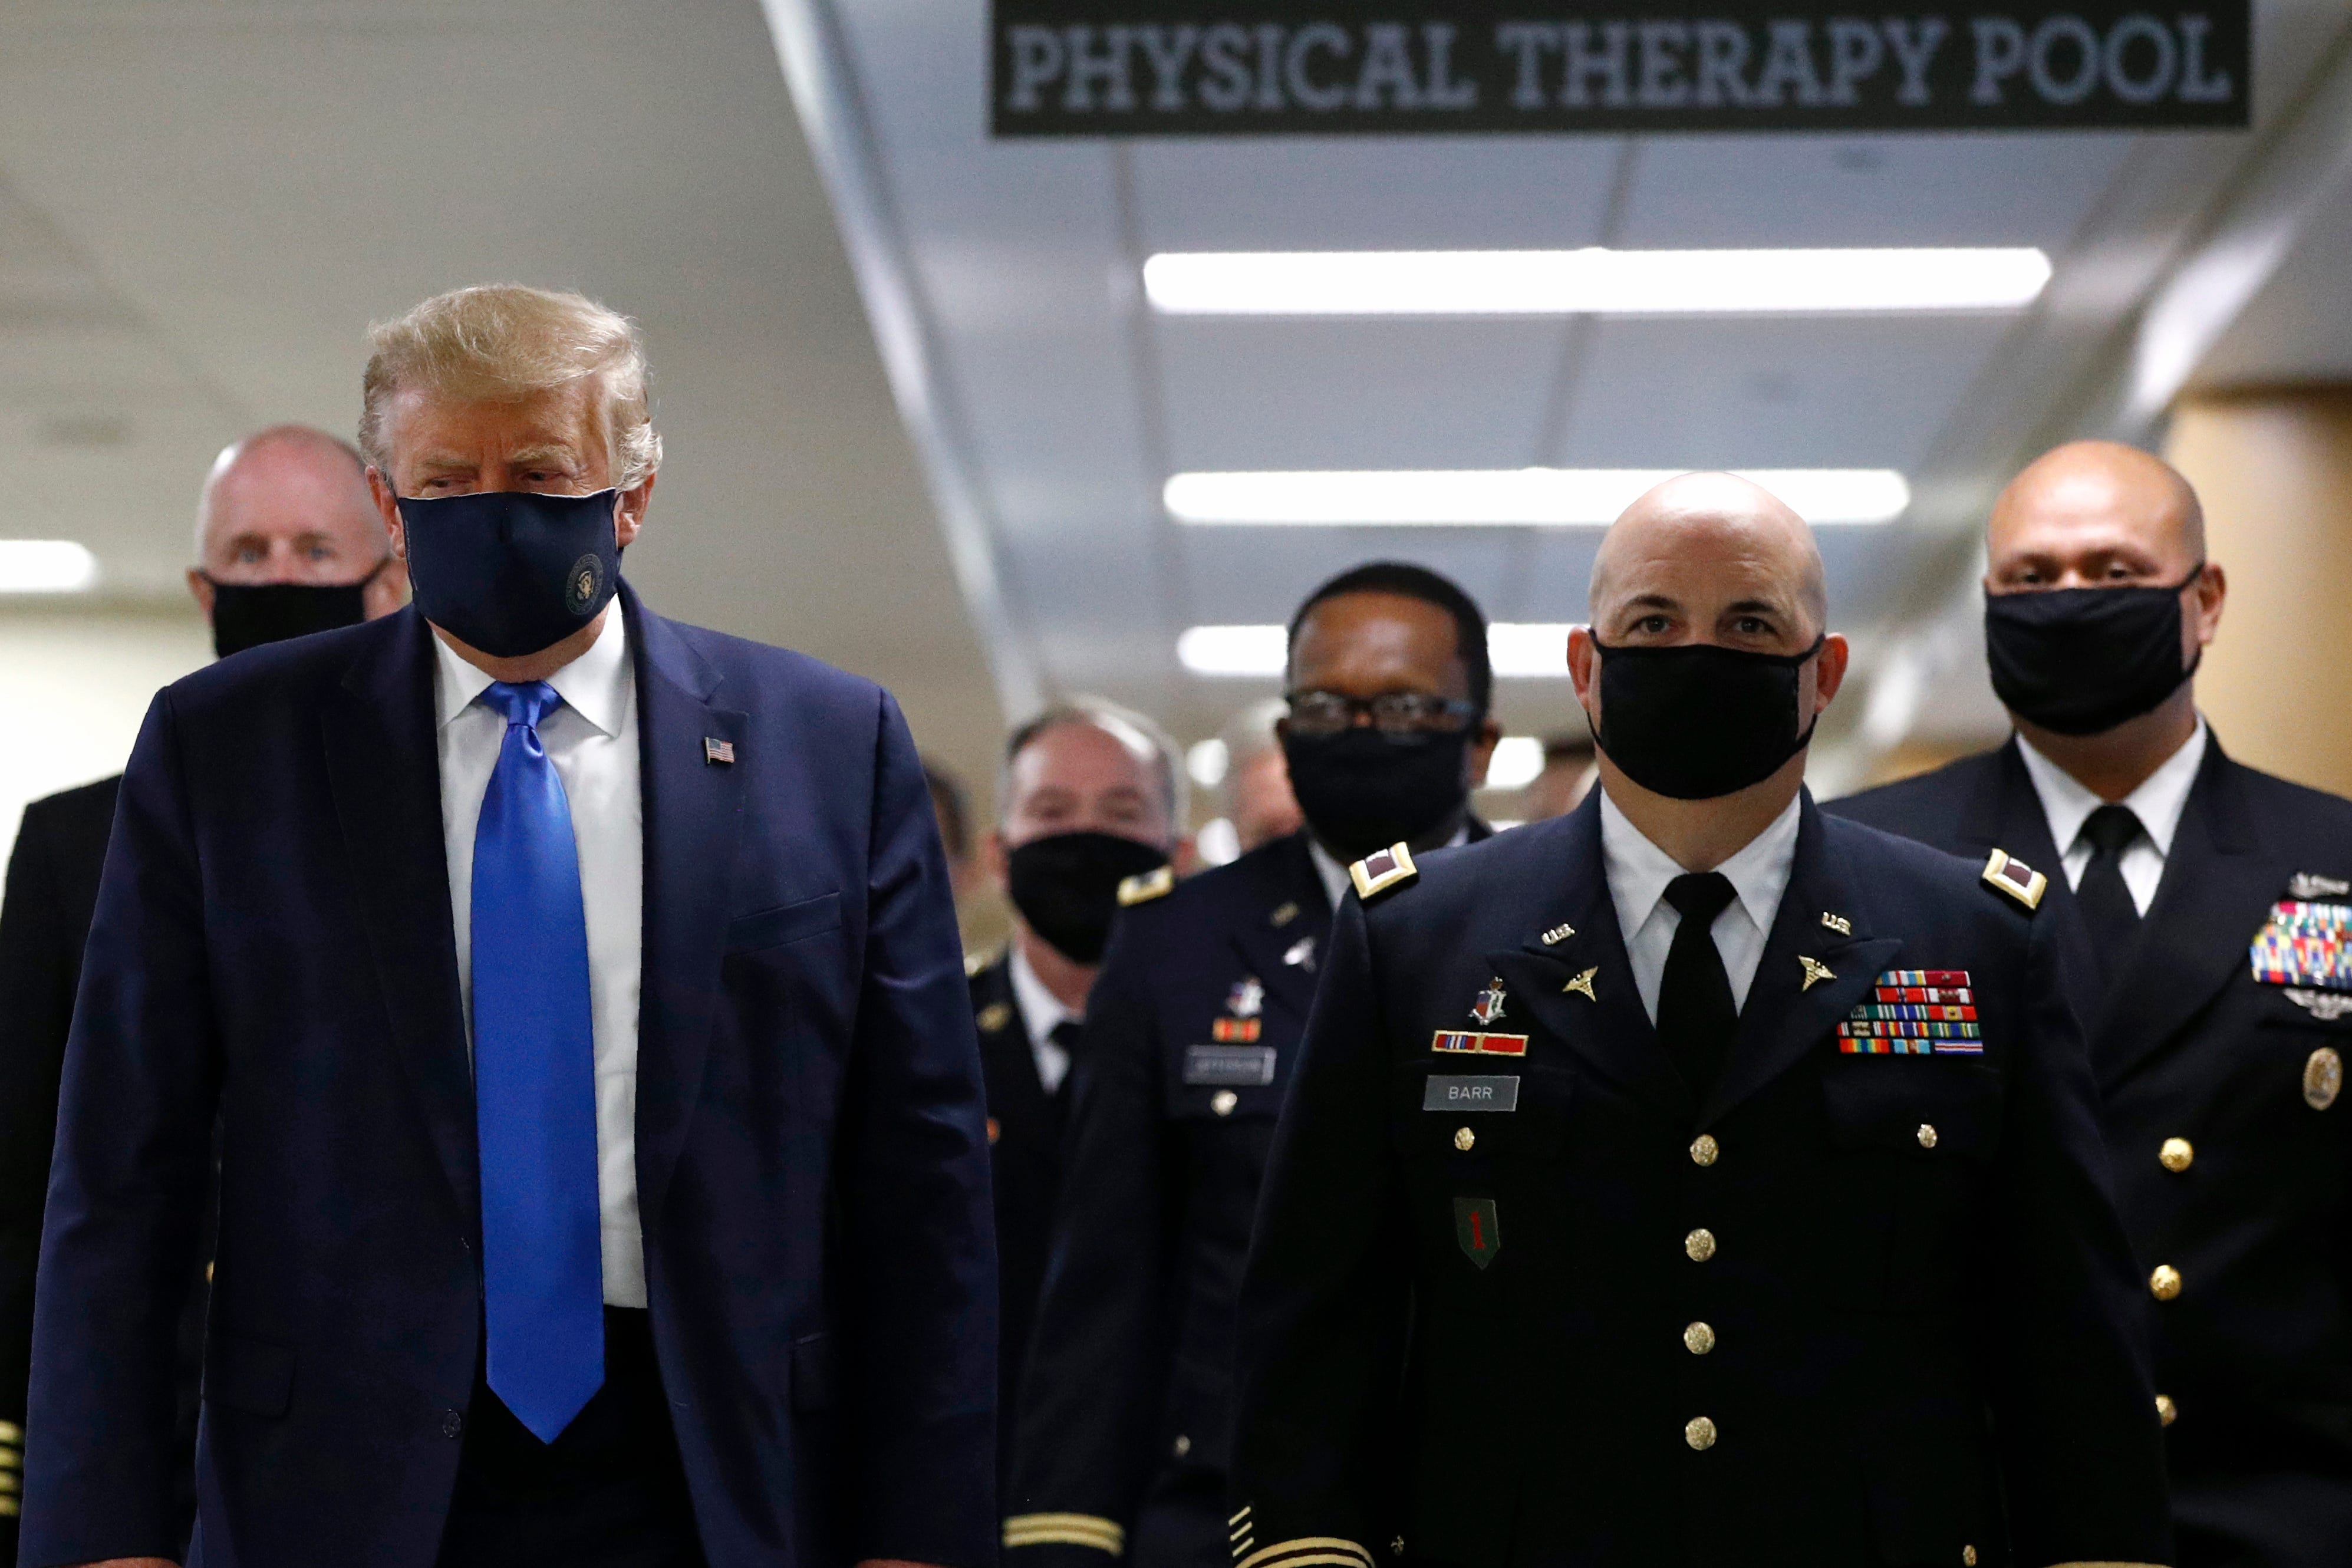 Trump wears mask at Walter Reed while visiting soldiers, medical staff